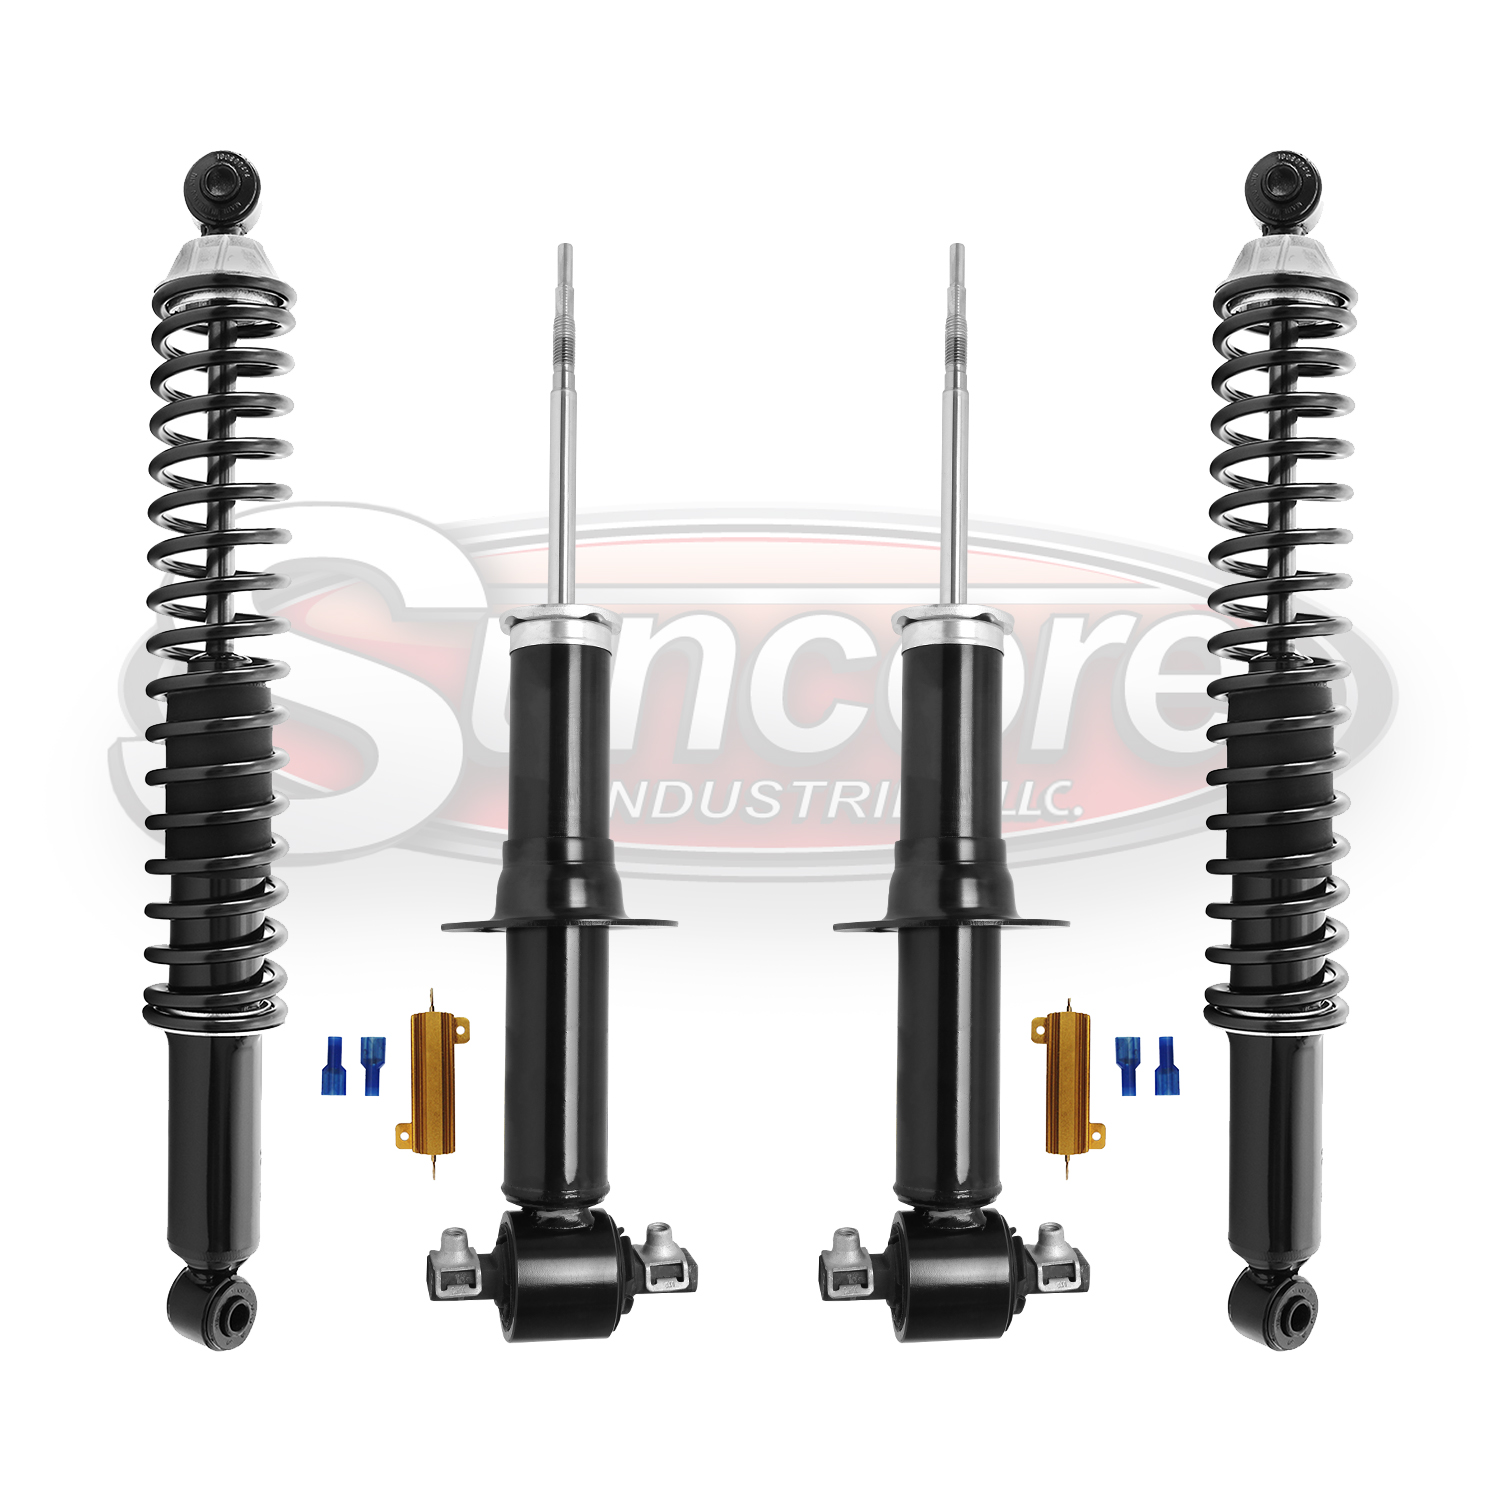 Autoride Conversion Struts & Shocks with Bypass - GMC, Cadillac & Chevy